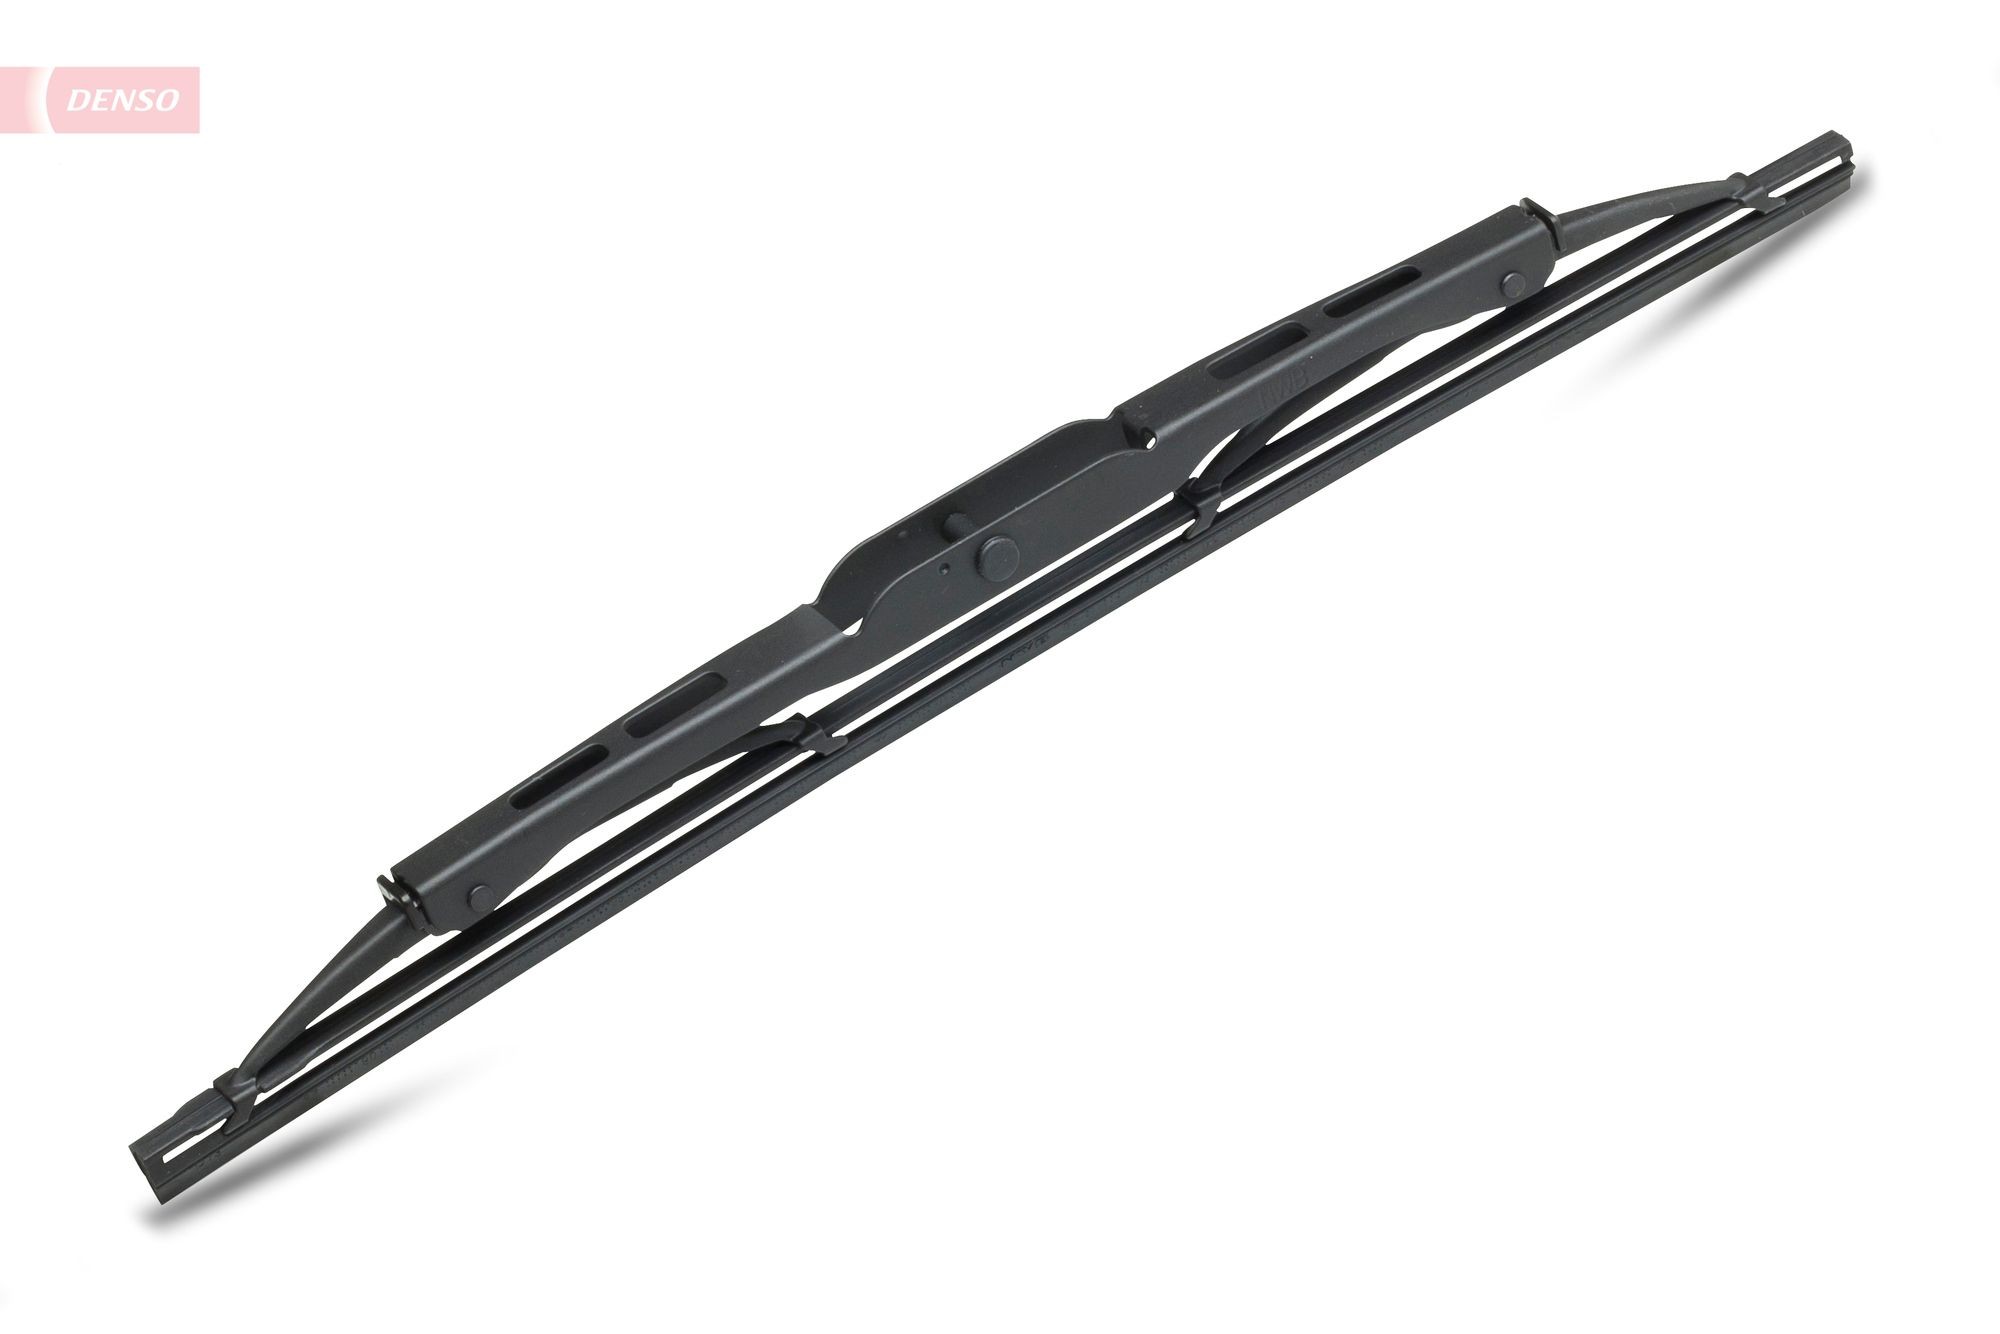 DM-030 DENSO Windscreen wipers IVECO 300 mm, Standard, 12 Inch